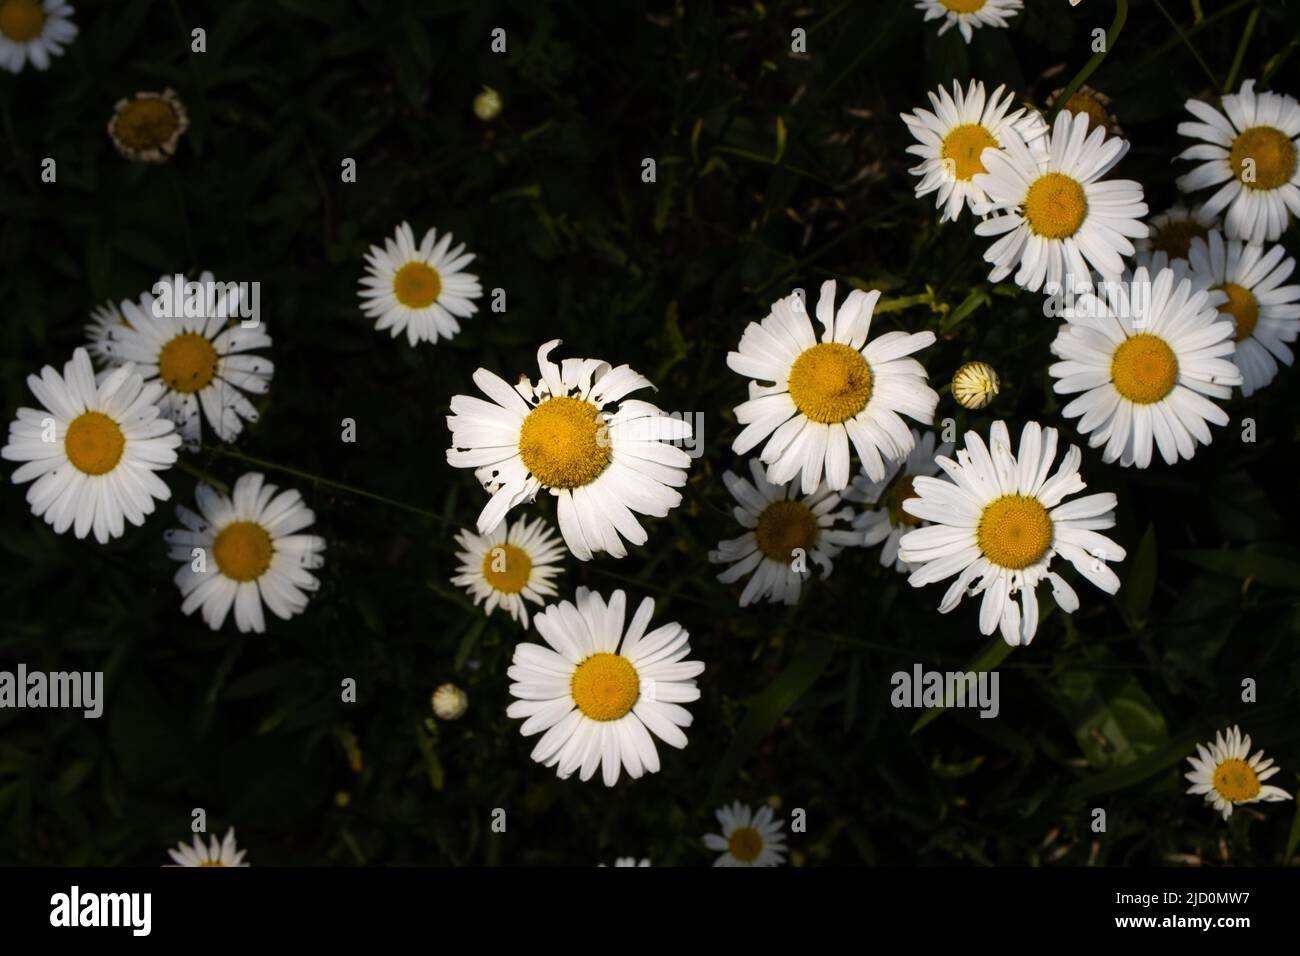 Up close view of wild daisies. Stock Photo